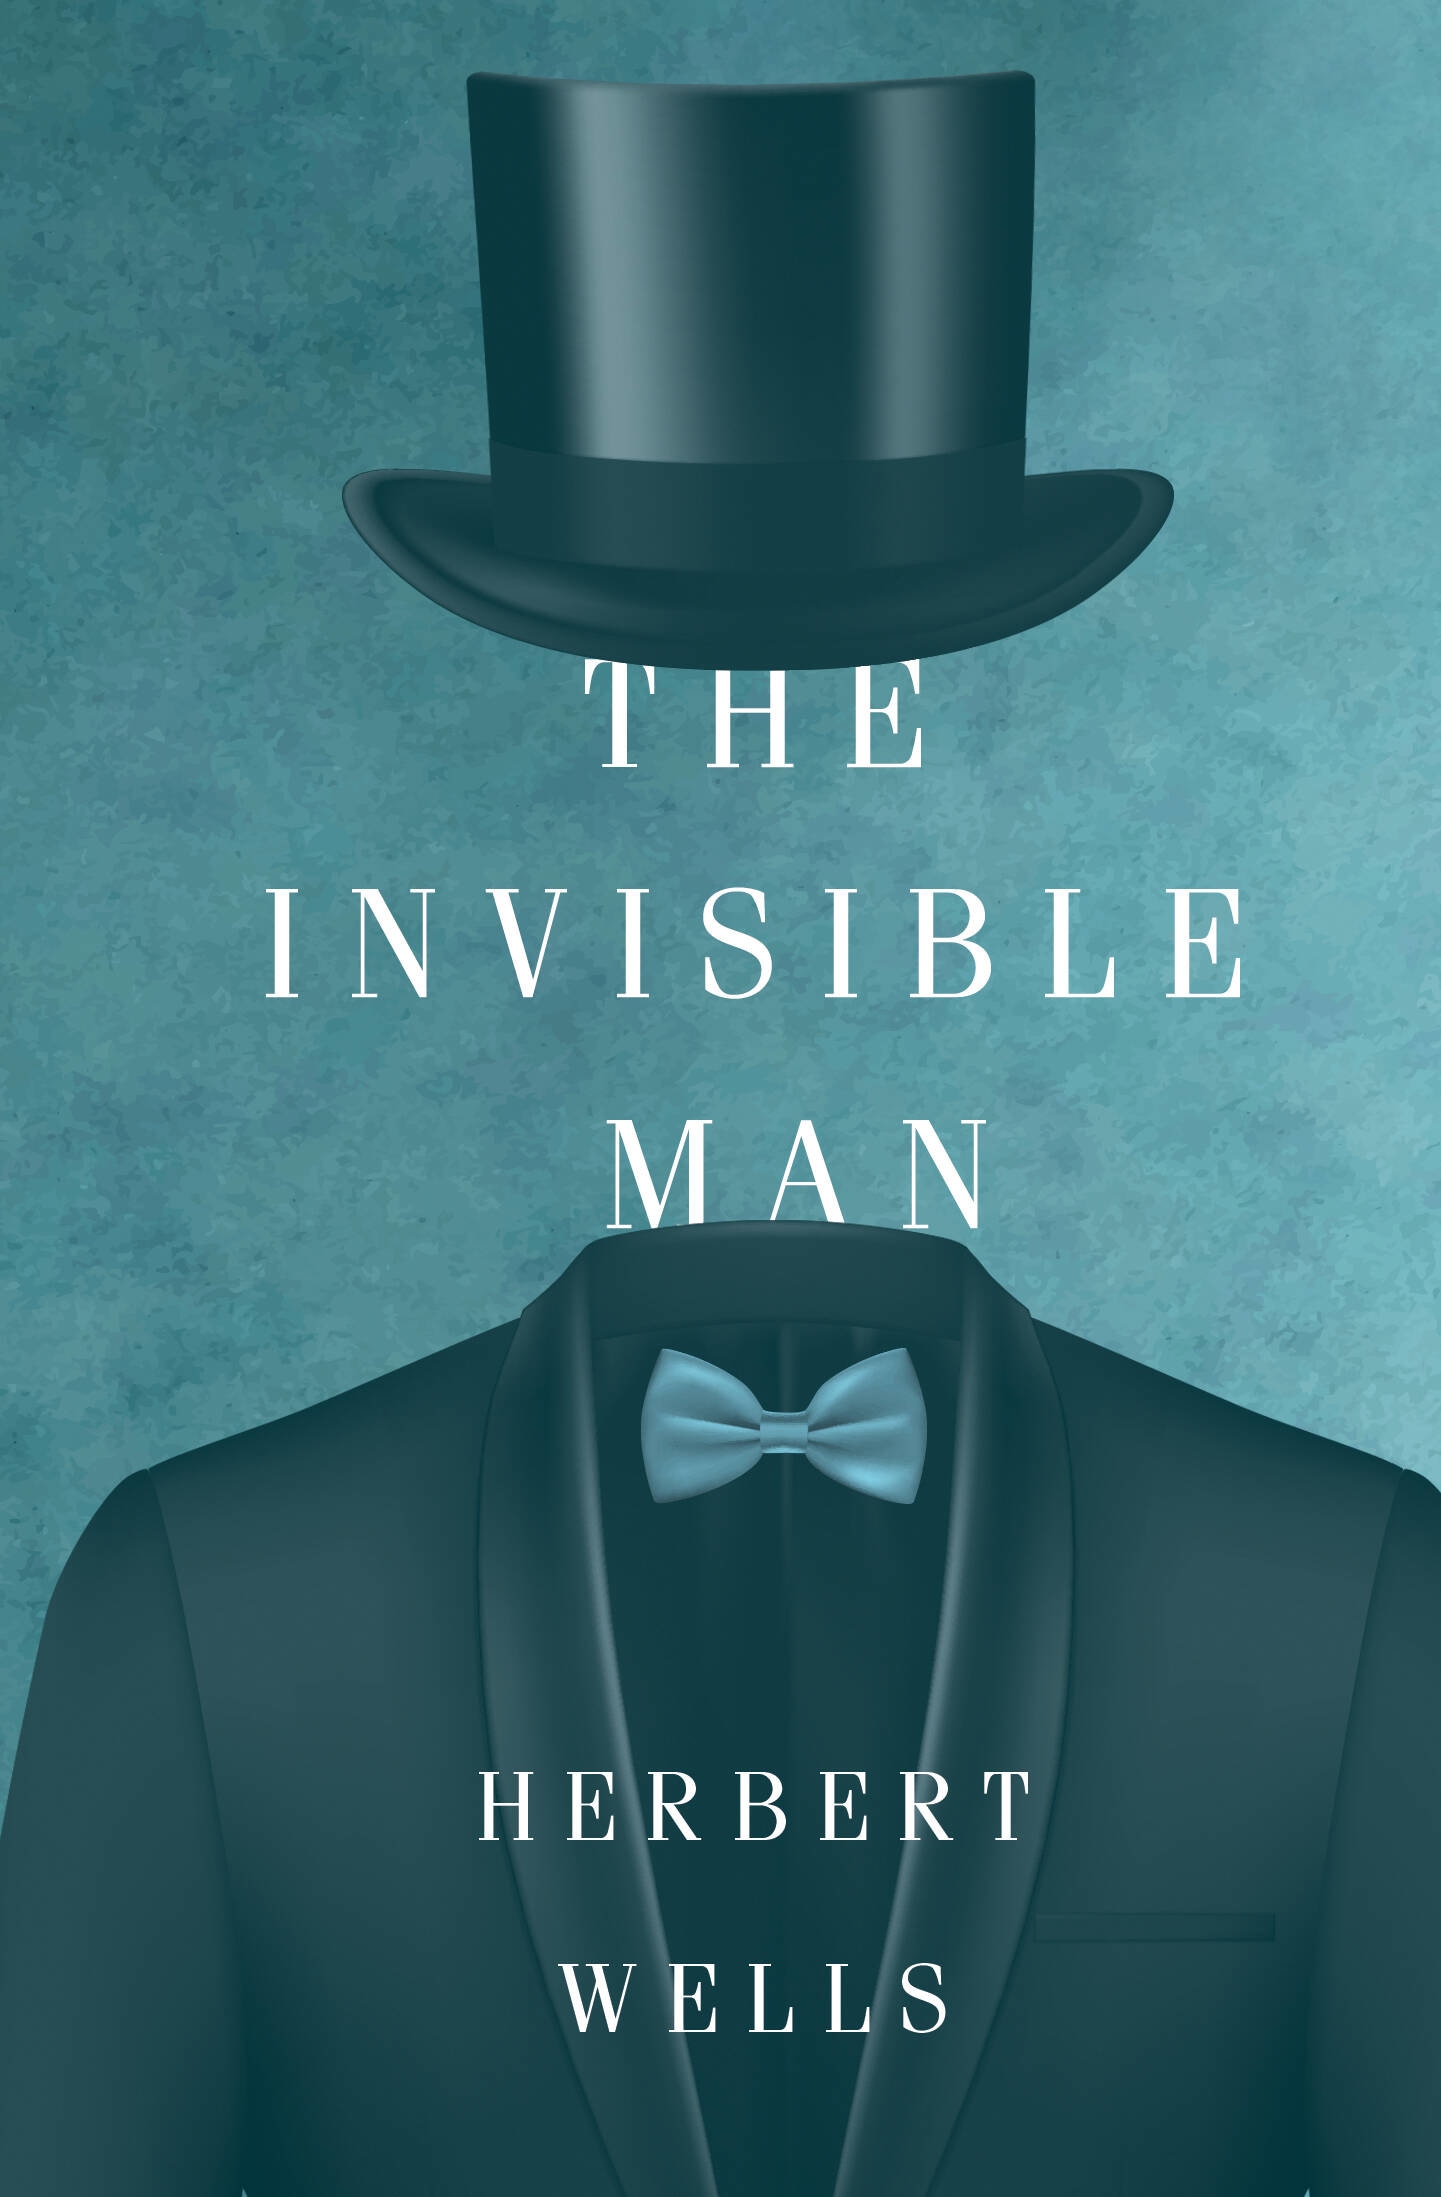 Book “The Invisible Man” by Уэллс Герберт Джордж — 2023